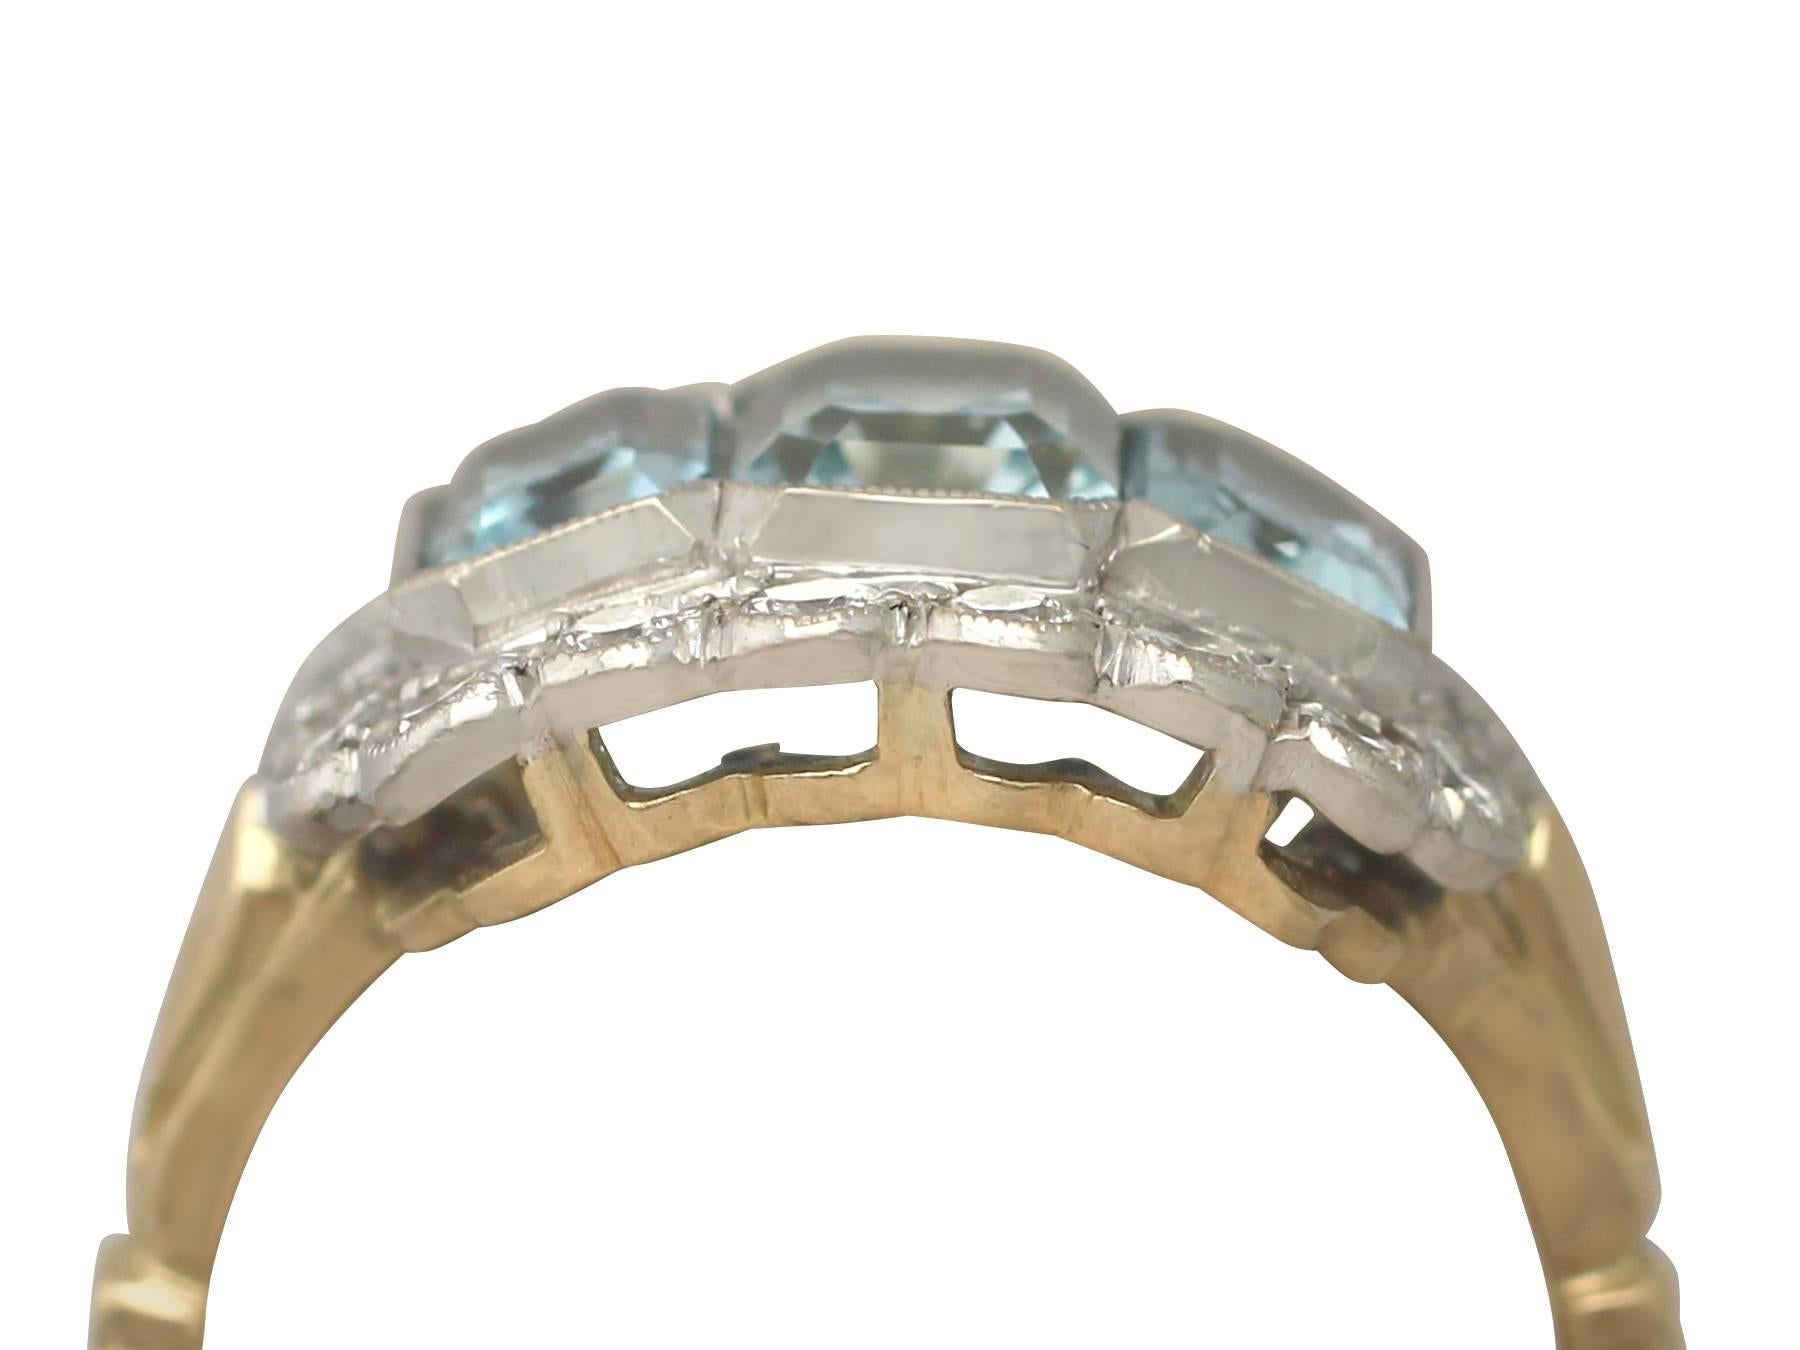 An impressive 2.23 carat aquamarine and 0.72 carat diamond, 18 carat yellow gold and 18 carat white gold set dress ring; part of our diverse jewellery collections

This fine and impressive aquamarine dress ring has been crafted in 18 ct yellow gold